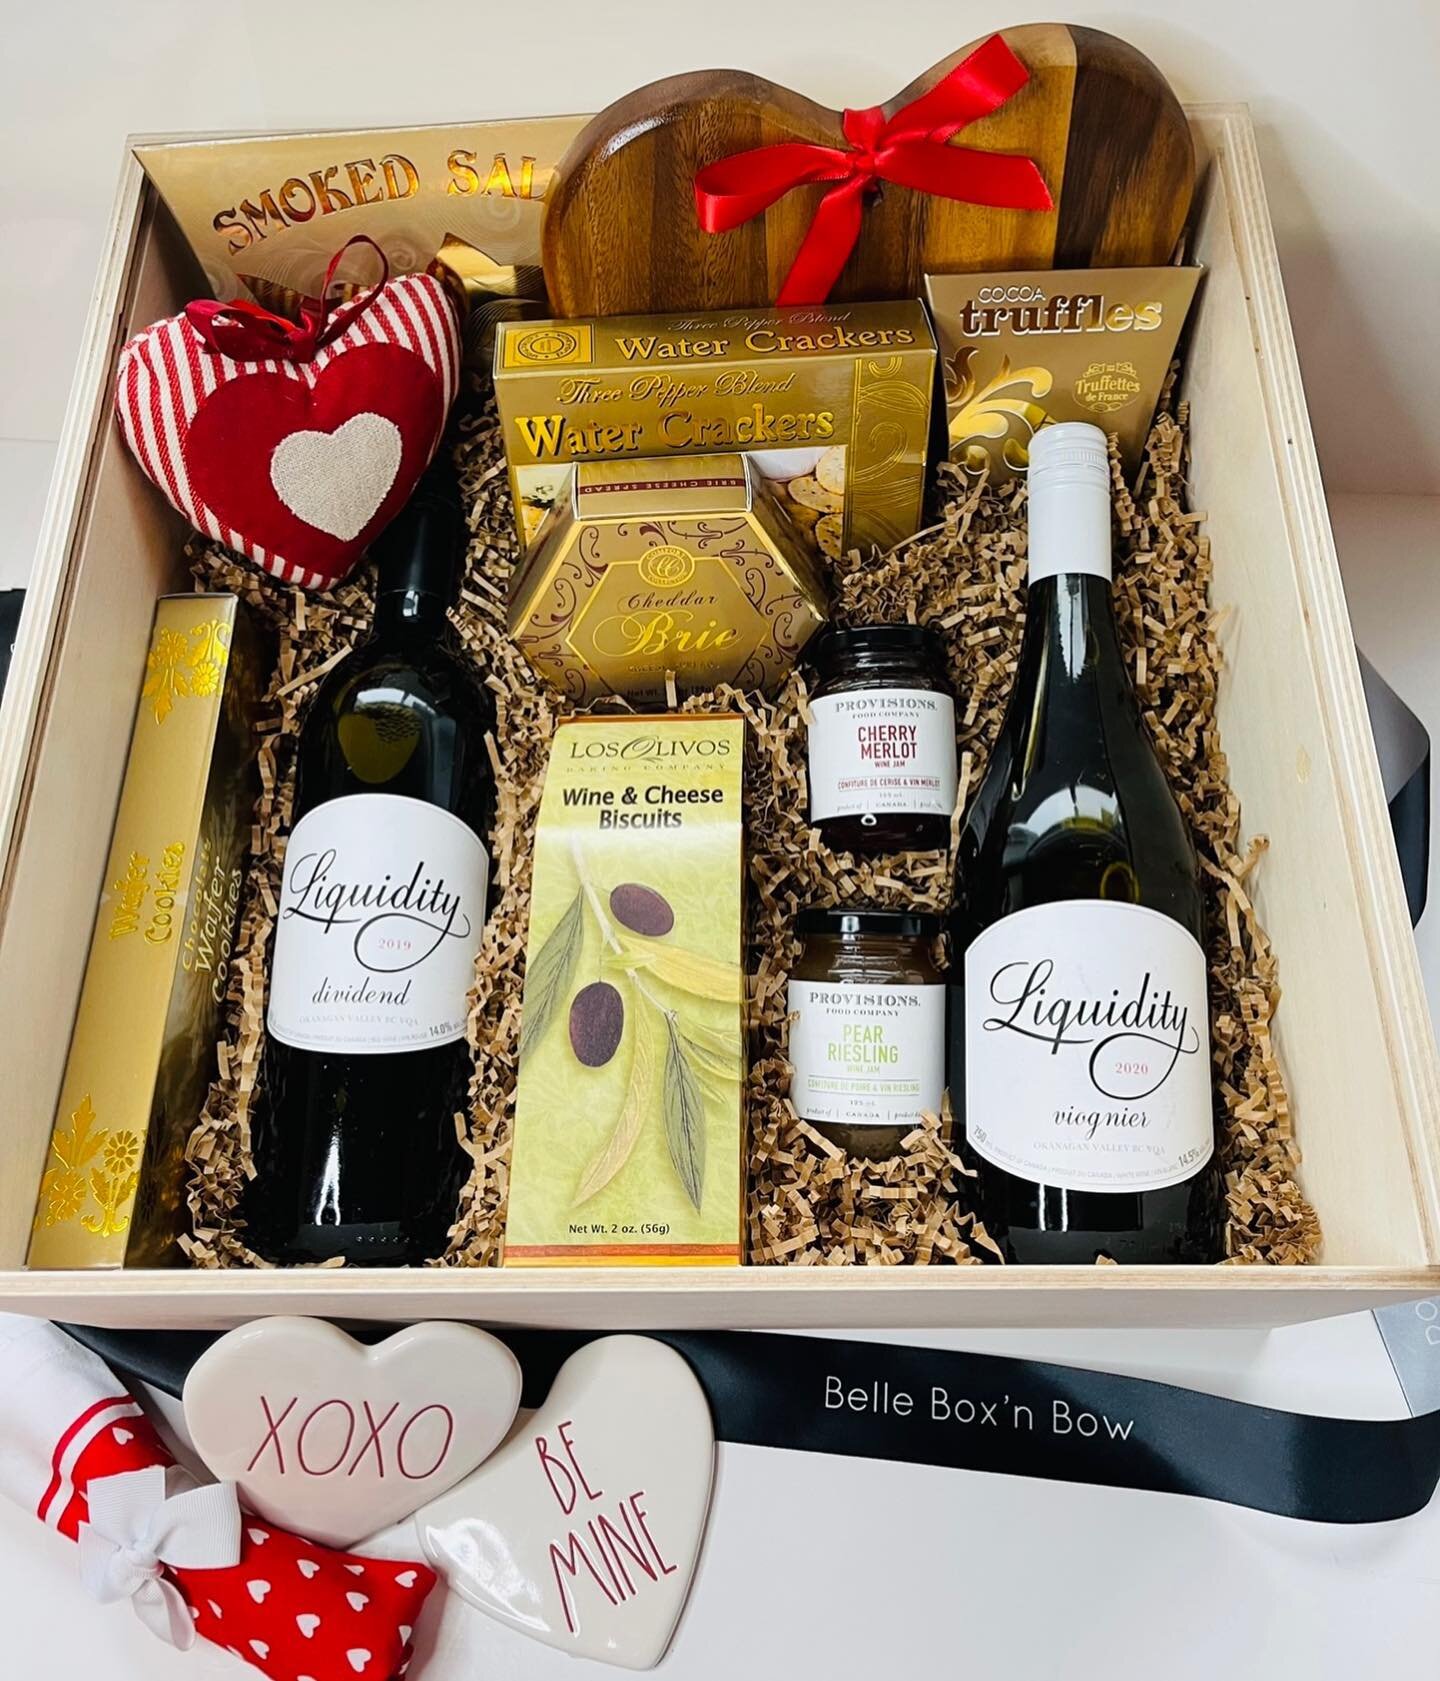 Express your love with our exclusive Wine &amp; Cheese Gift Box!❤️

#valentine #valentinesdaygift #wineandcheese #curatedgifts #giftideas #coquitlam #burkemountain